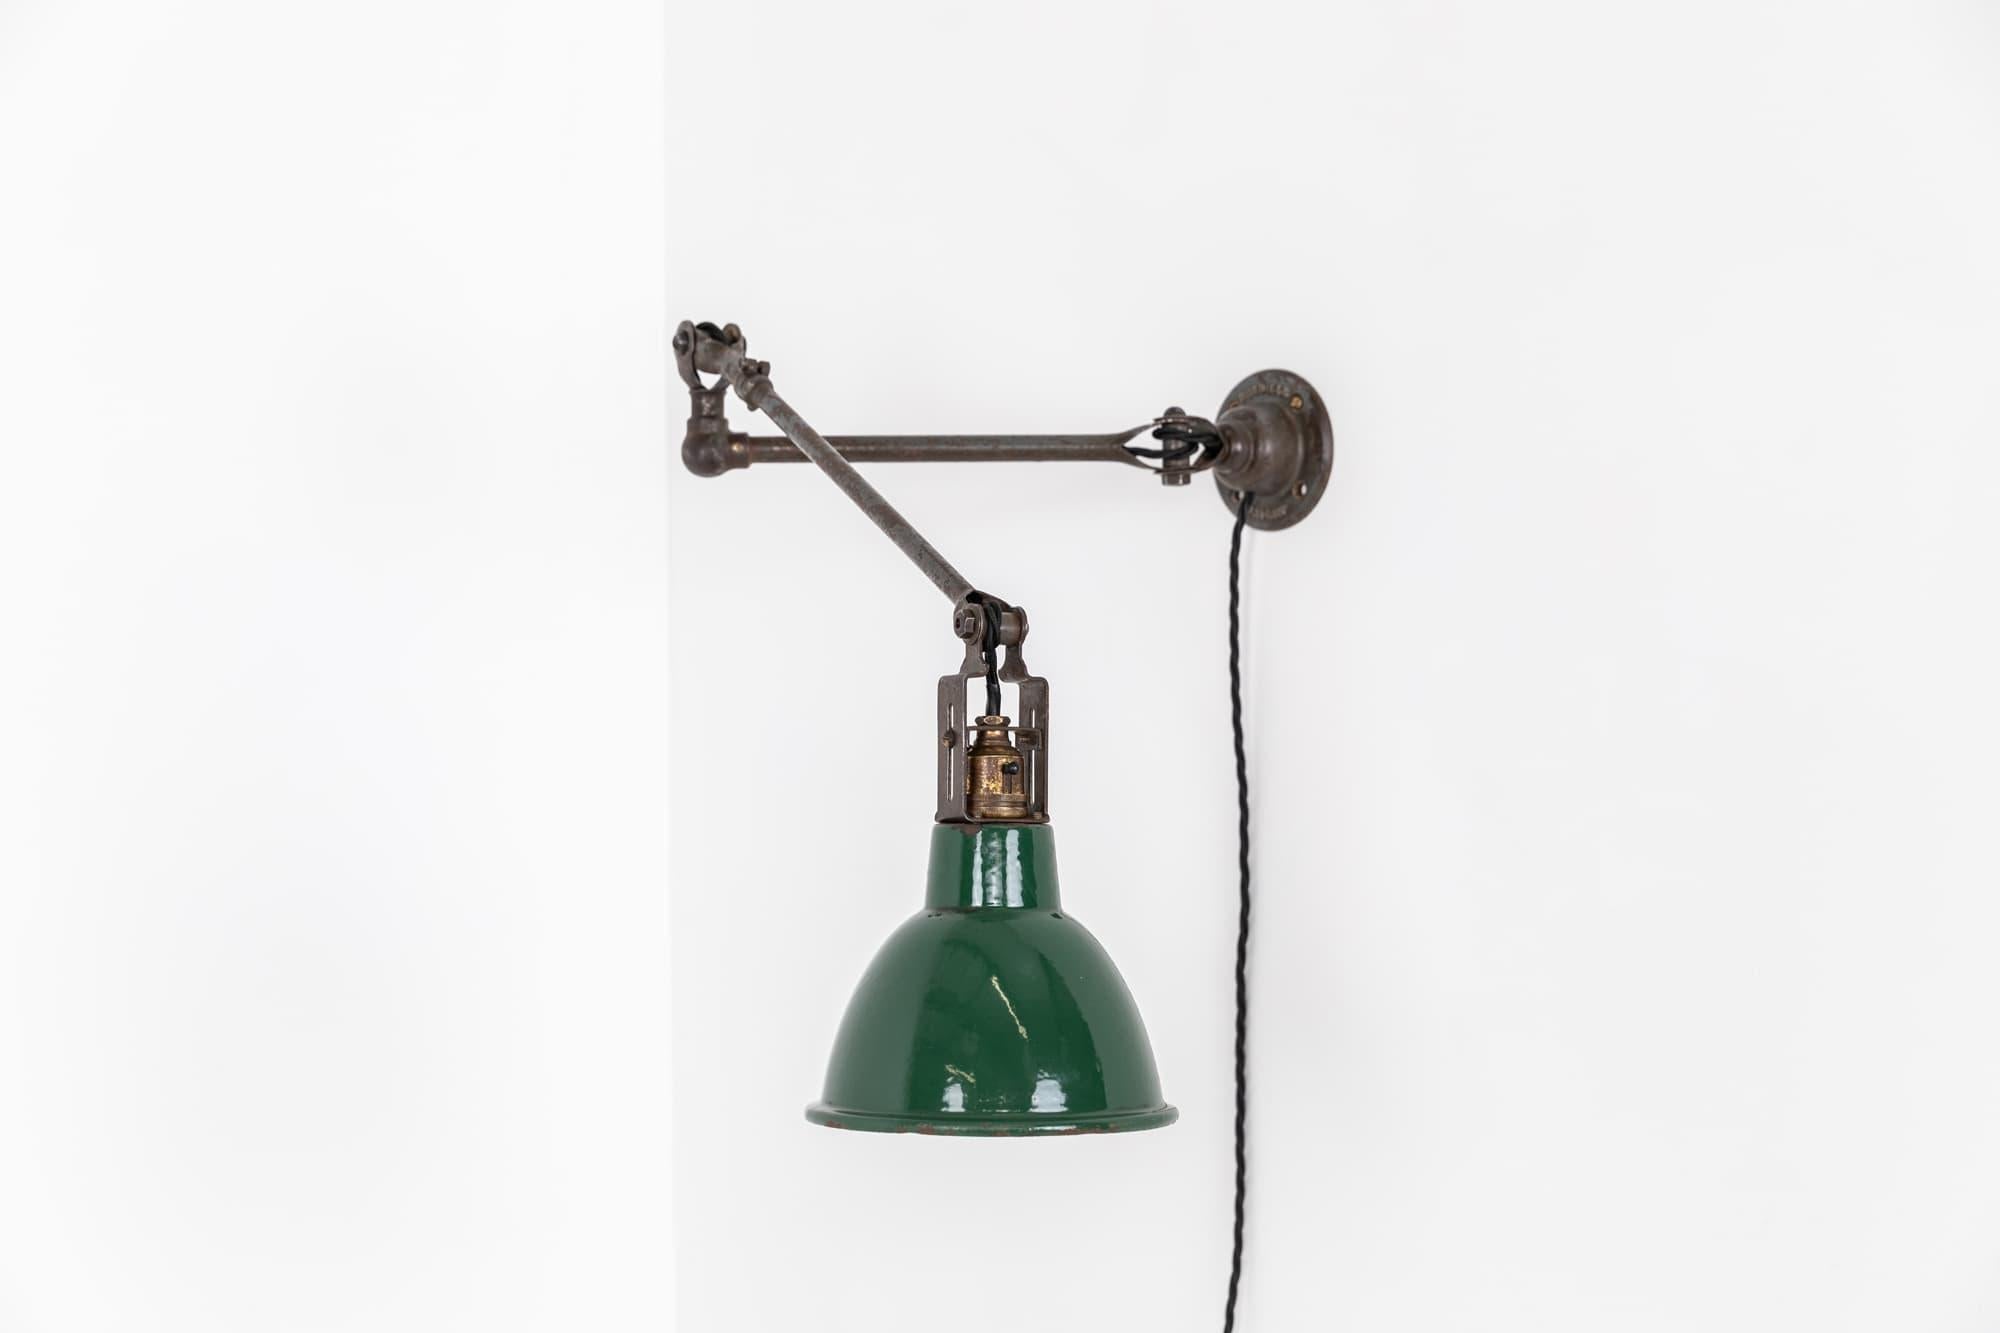 Beautifully engineered workman's lamp designed by renowned lighting manufactures Dugdills. c.1930

In un-touched, original condition - the lamp retains its factory paint throughout and even the matchstick bulbholder. Great articulating motion makes